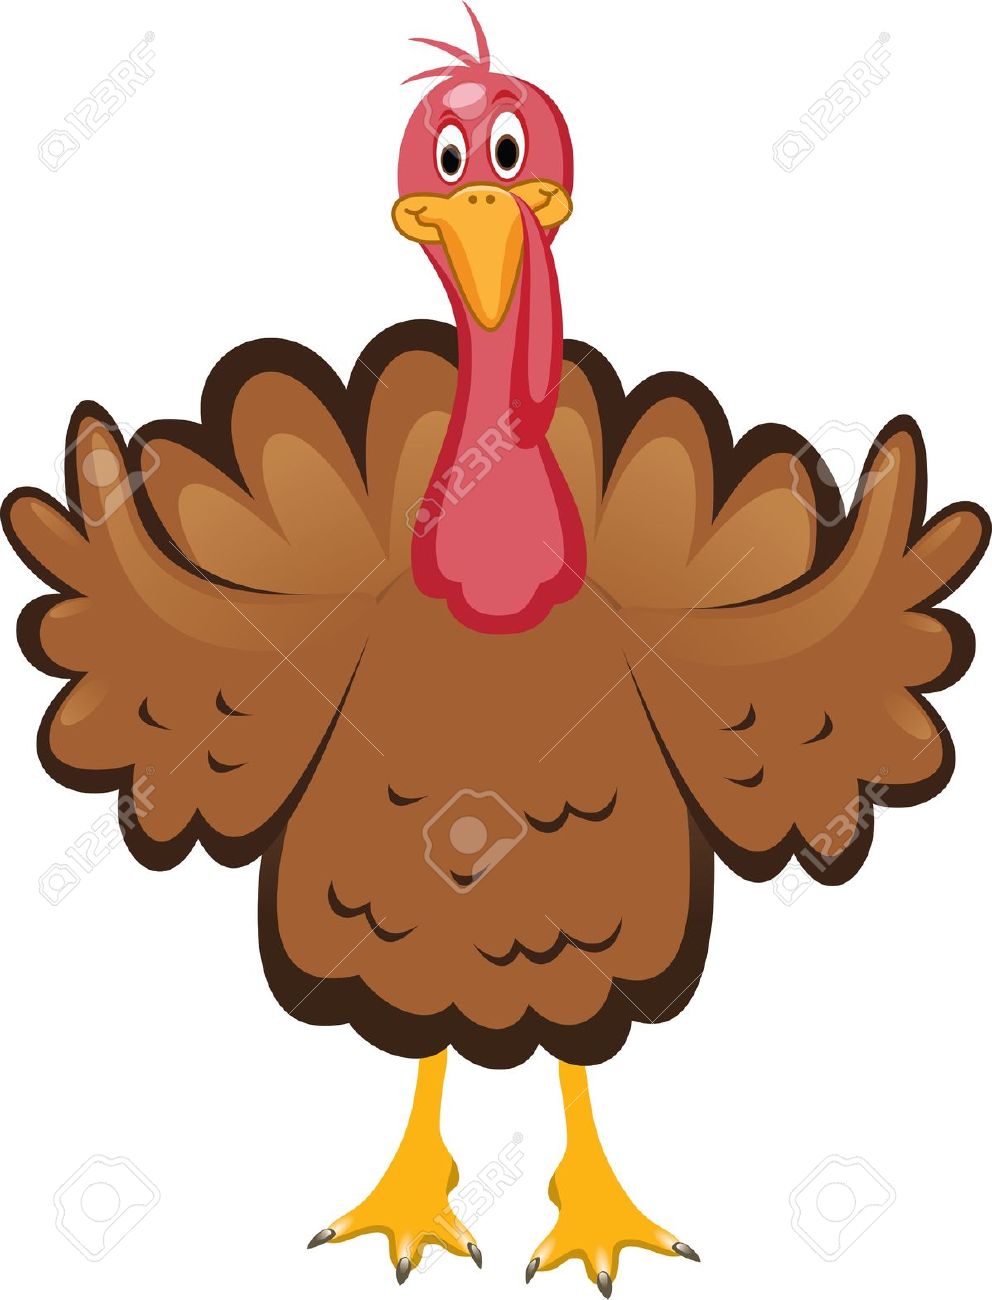 clipart turkey pictures - photo #31